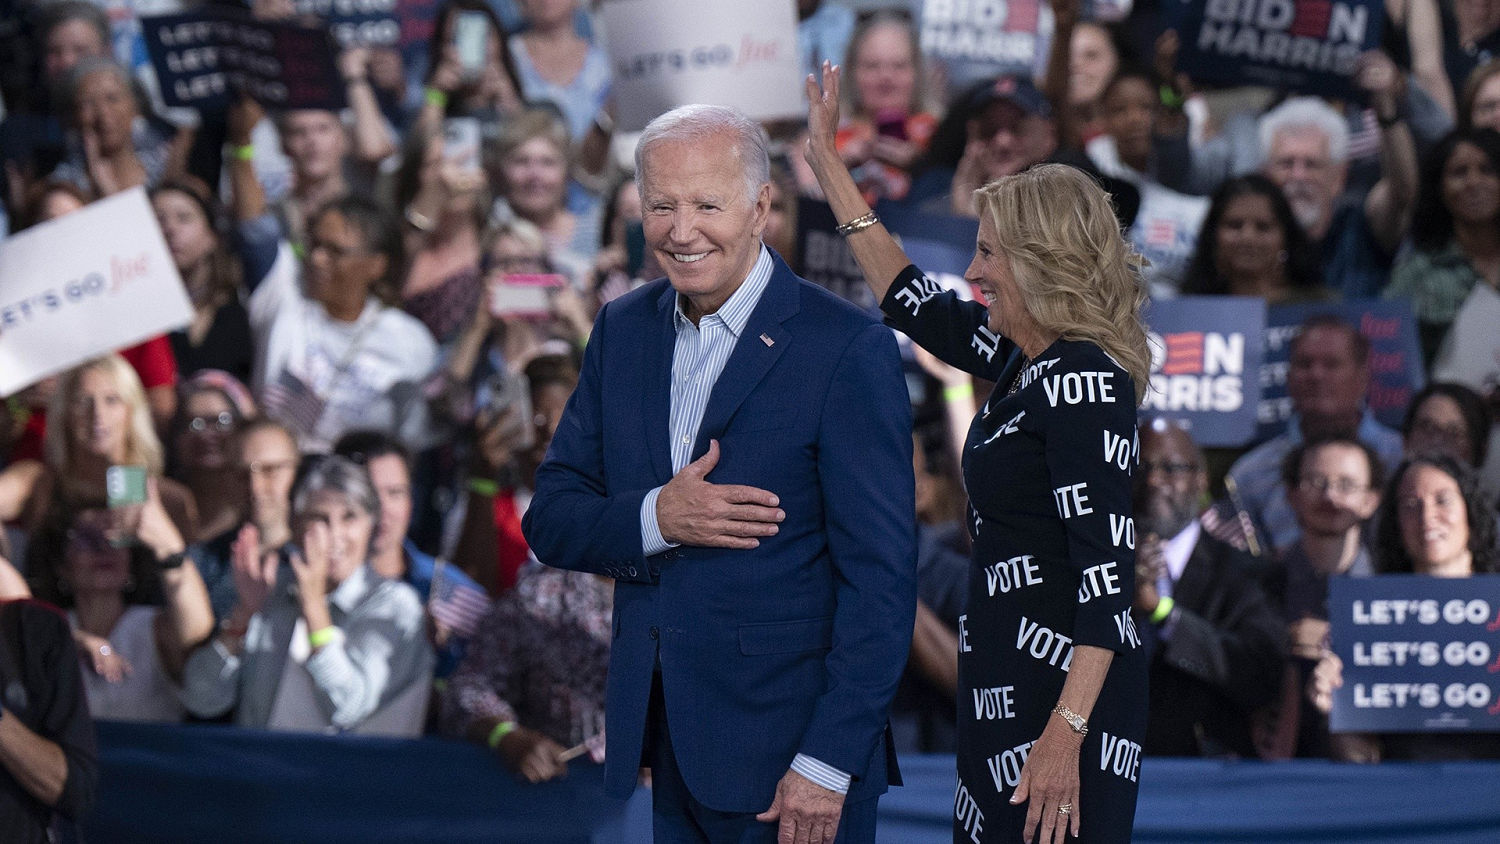 Biden campaign works to calm voters after first debate